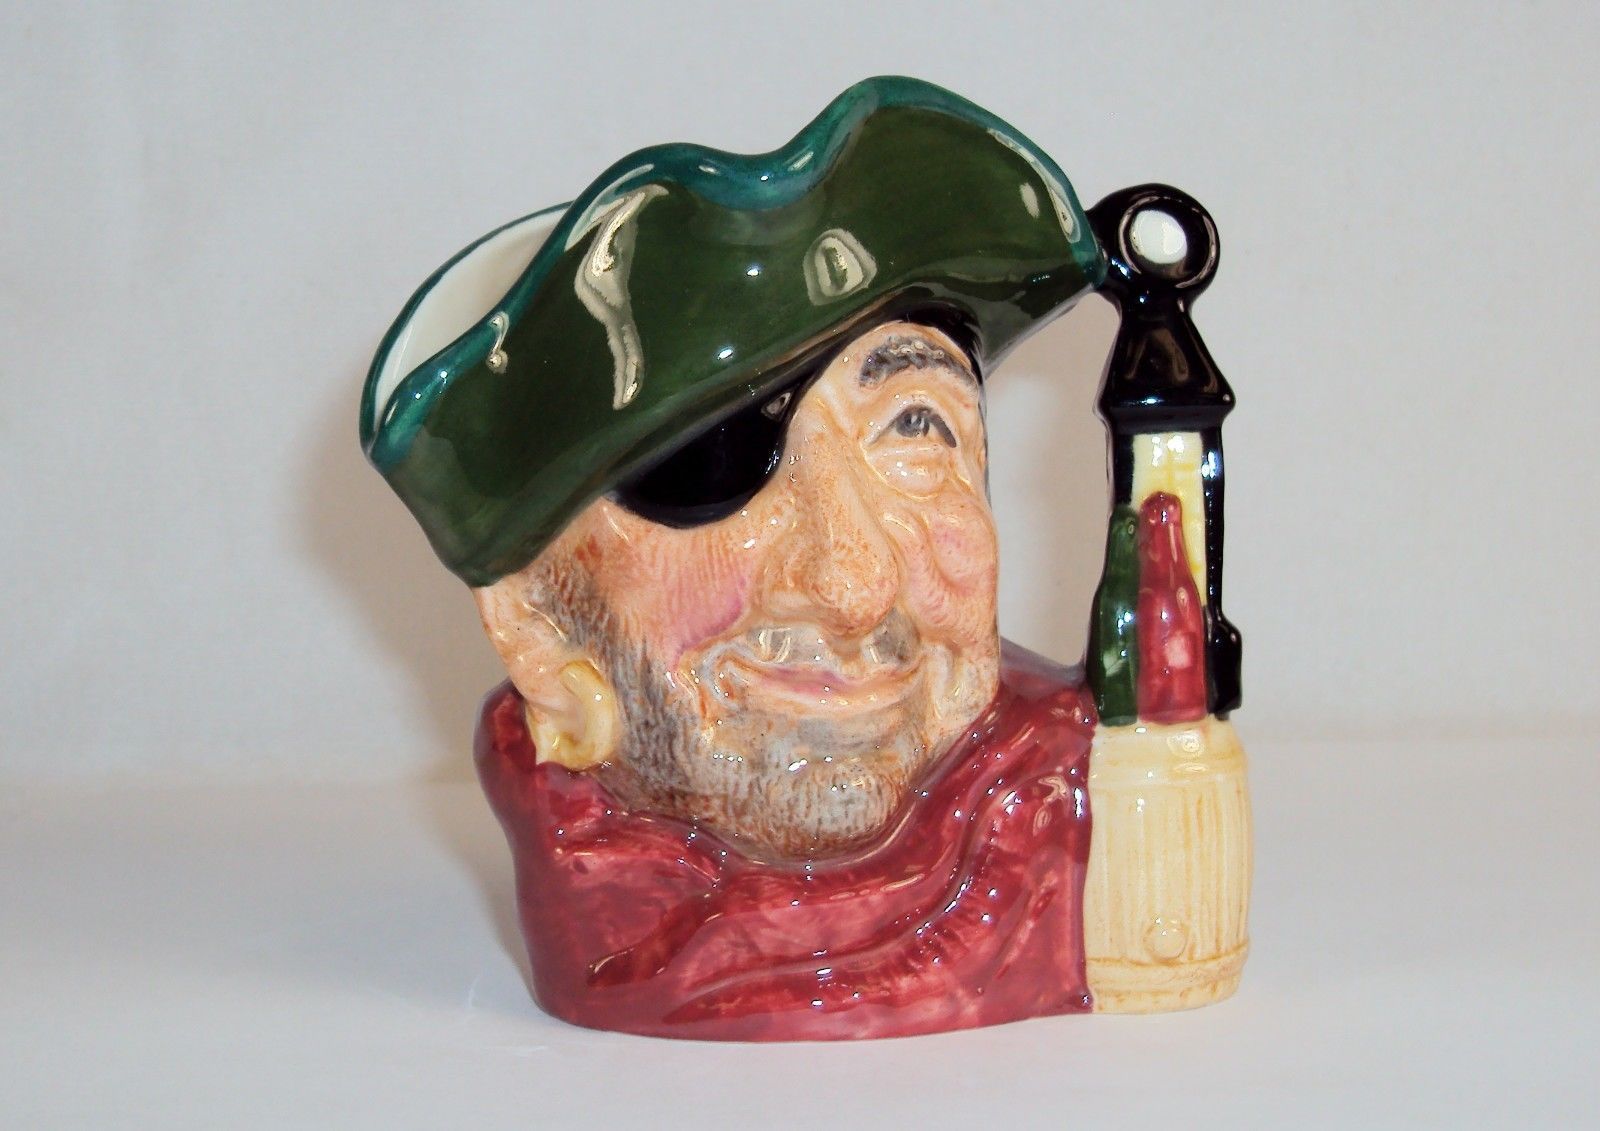 Primary image for Toby Character Jug (Small) ~"Smuggler" ~ Royal Doulton D6619, 1967, #9120360